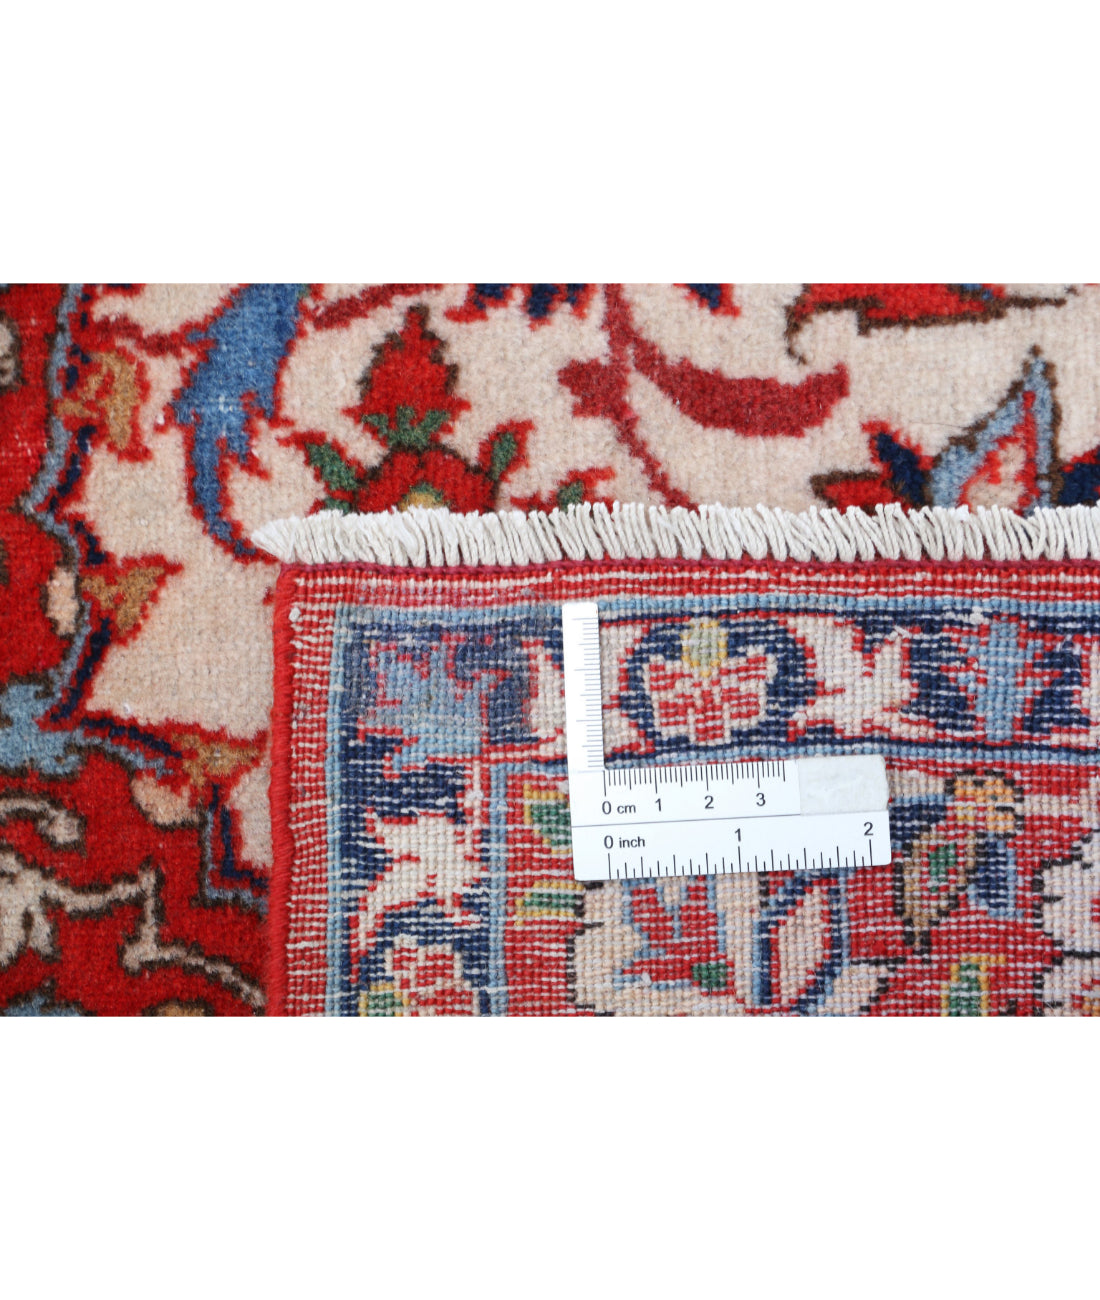 Isfahan 3'3'' X 4'10'' Hand-Knotted Wool Rug 3'3'' x 4'10'' (98 X 145) / Ivory / Red